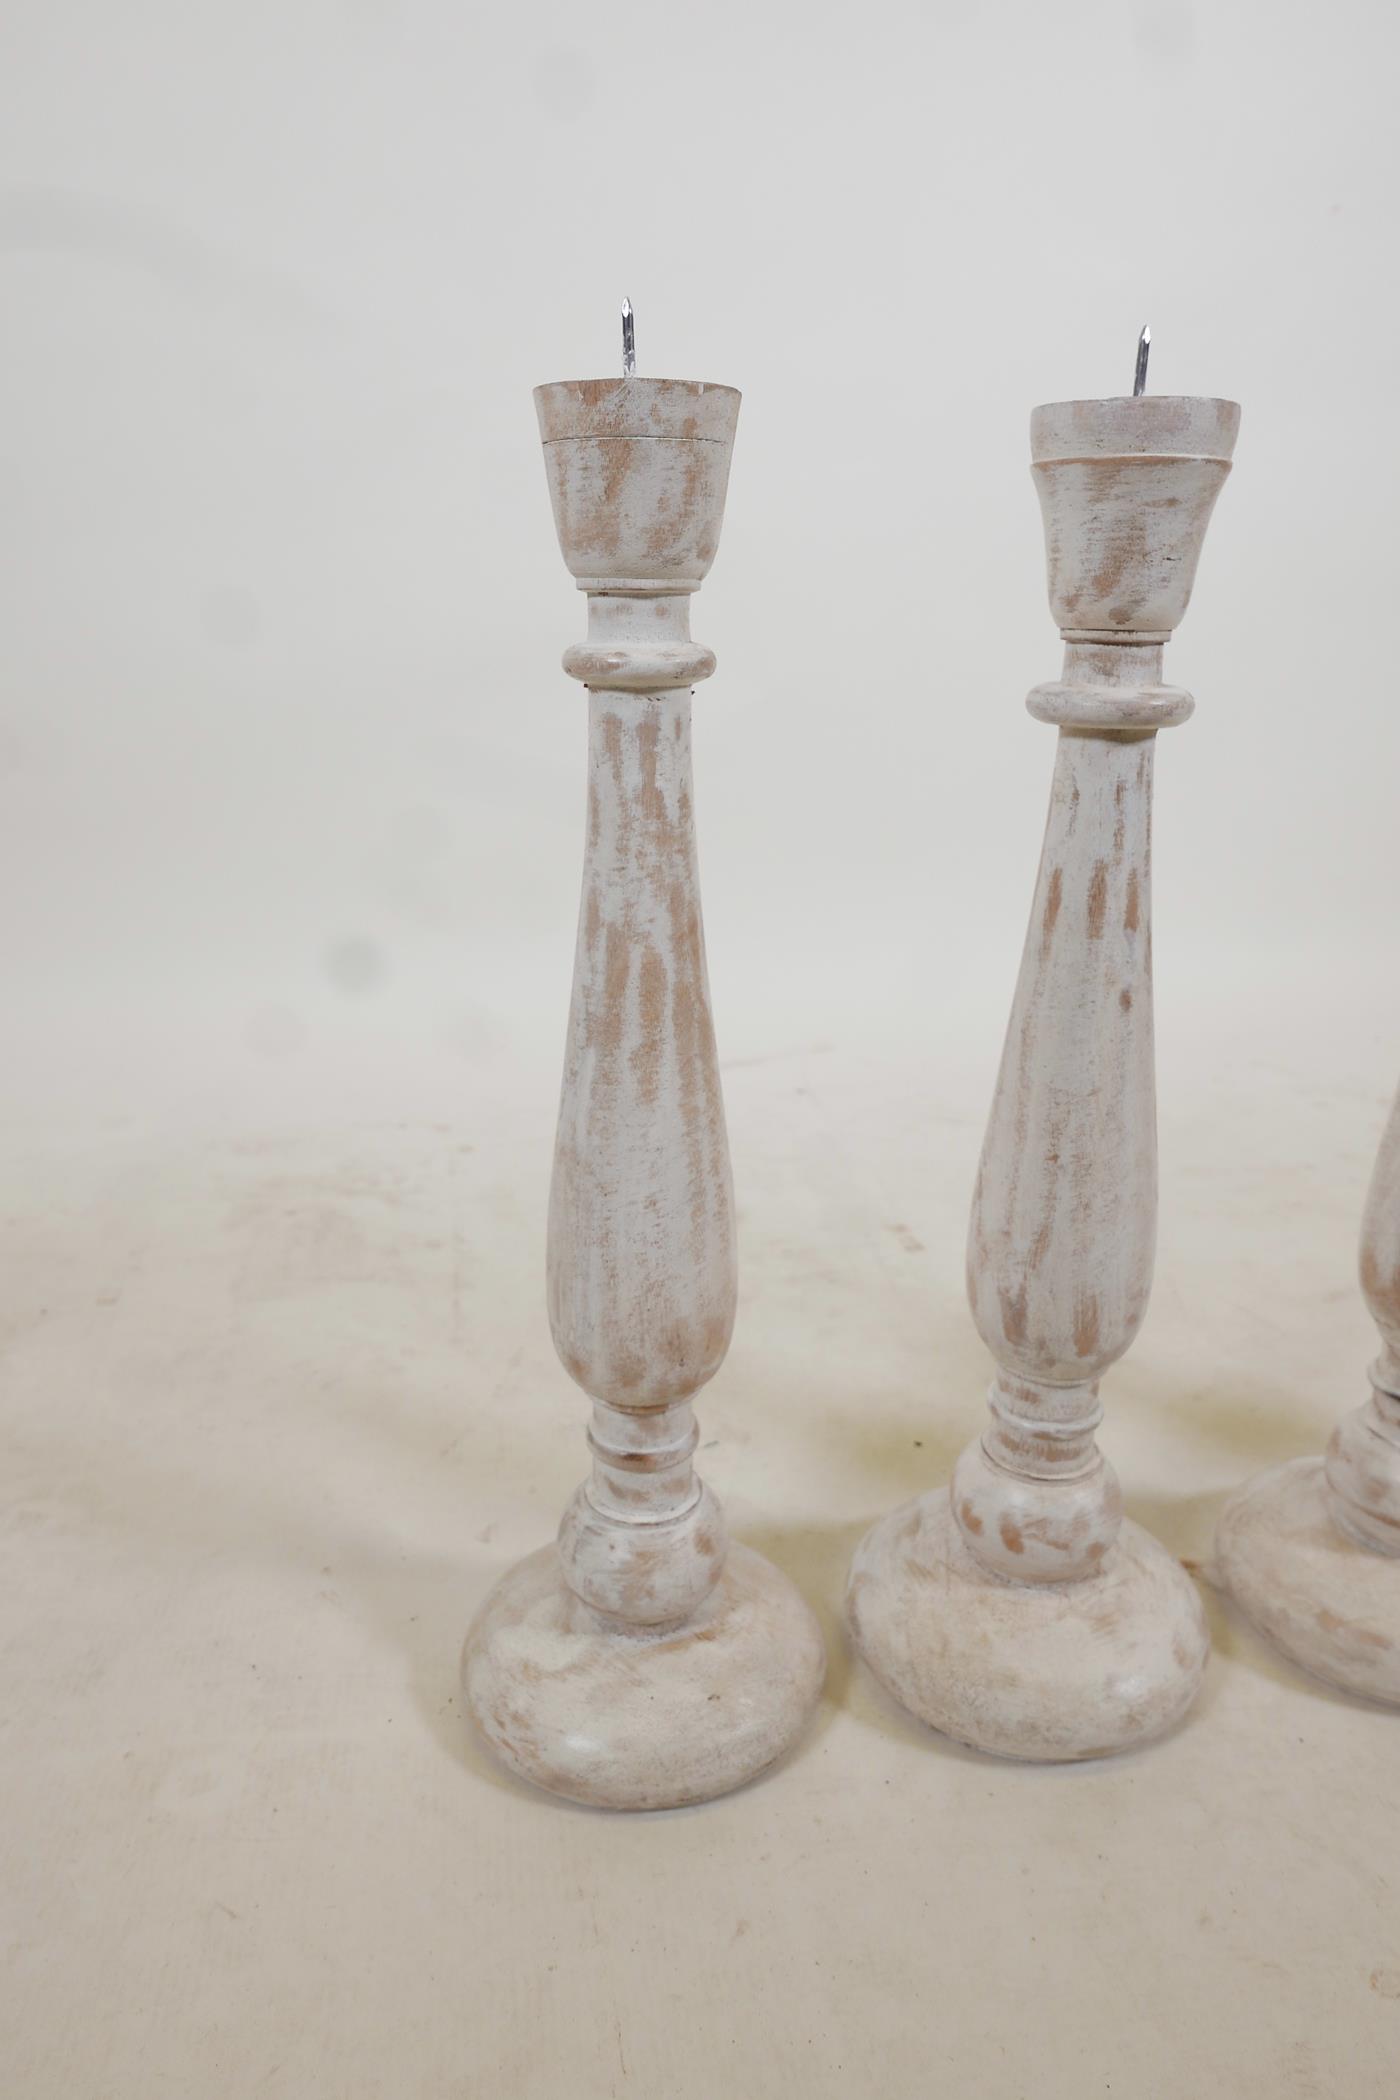 A set of four turned and painted wood pricket candlesticks with a distressed finish, 19" high - Image 2 of 2